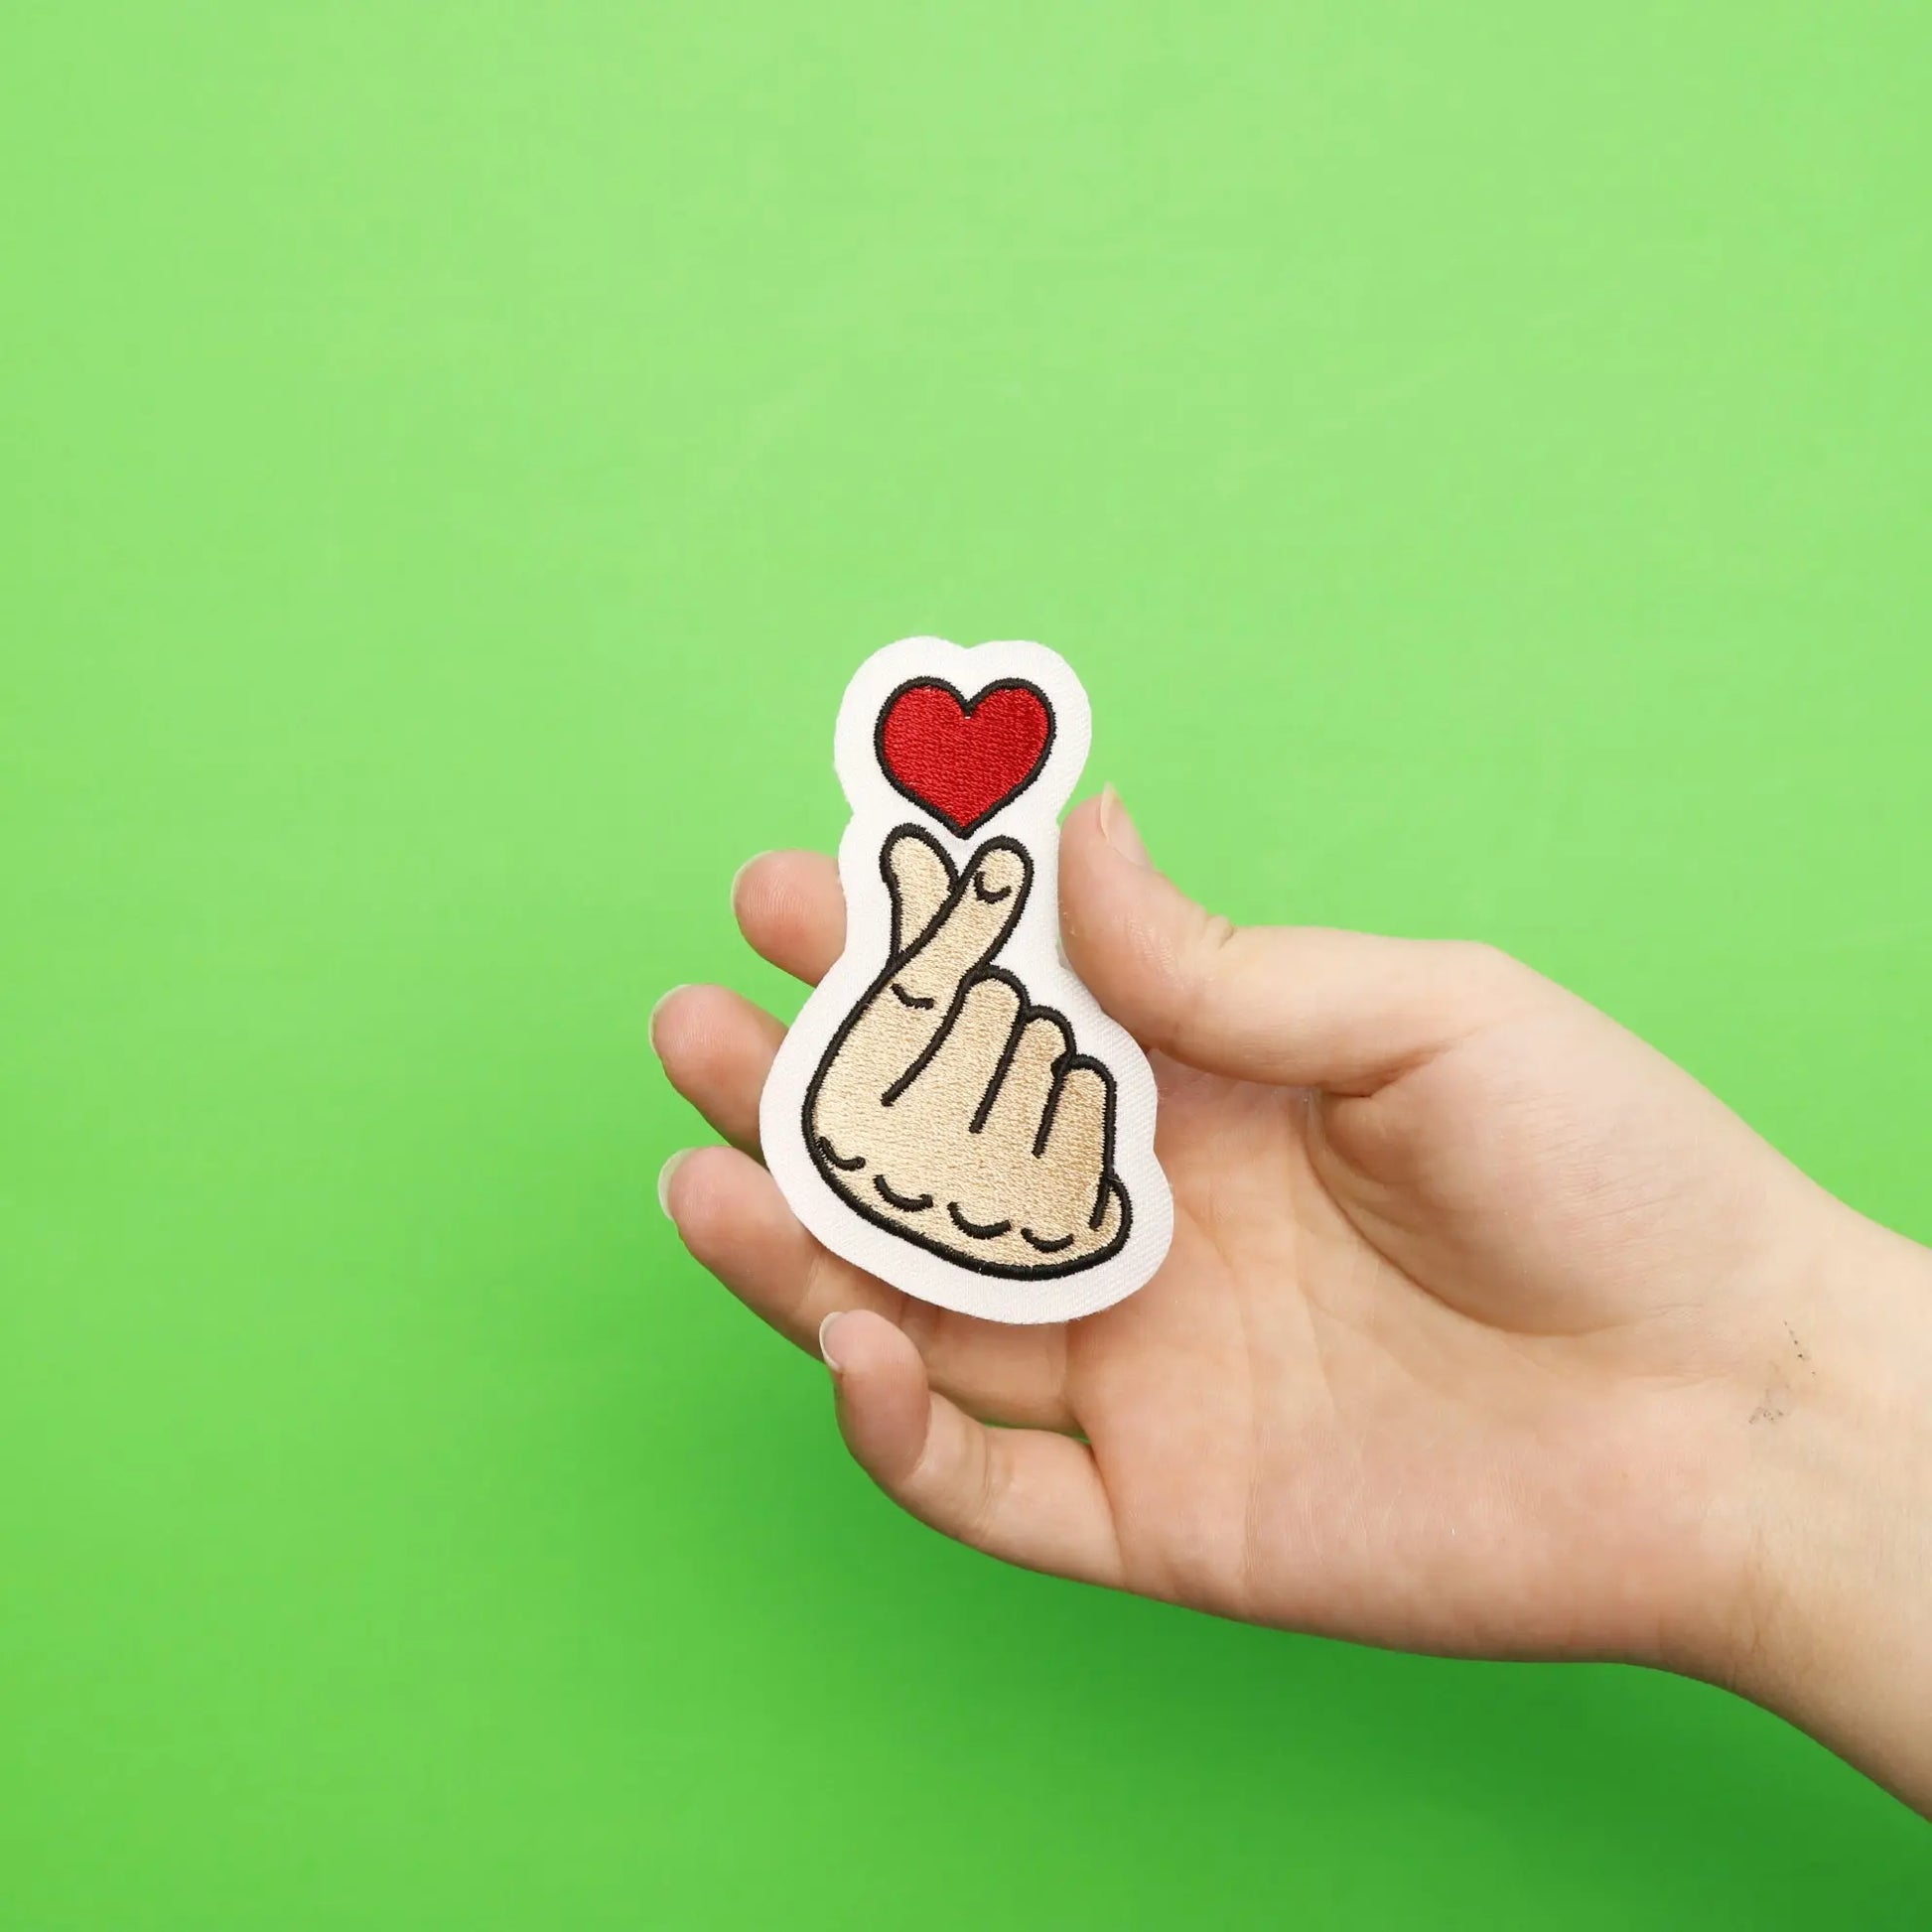 K-Pop Heart Fingers Embroidered Iron On Patch 